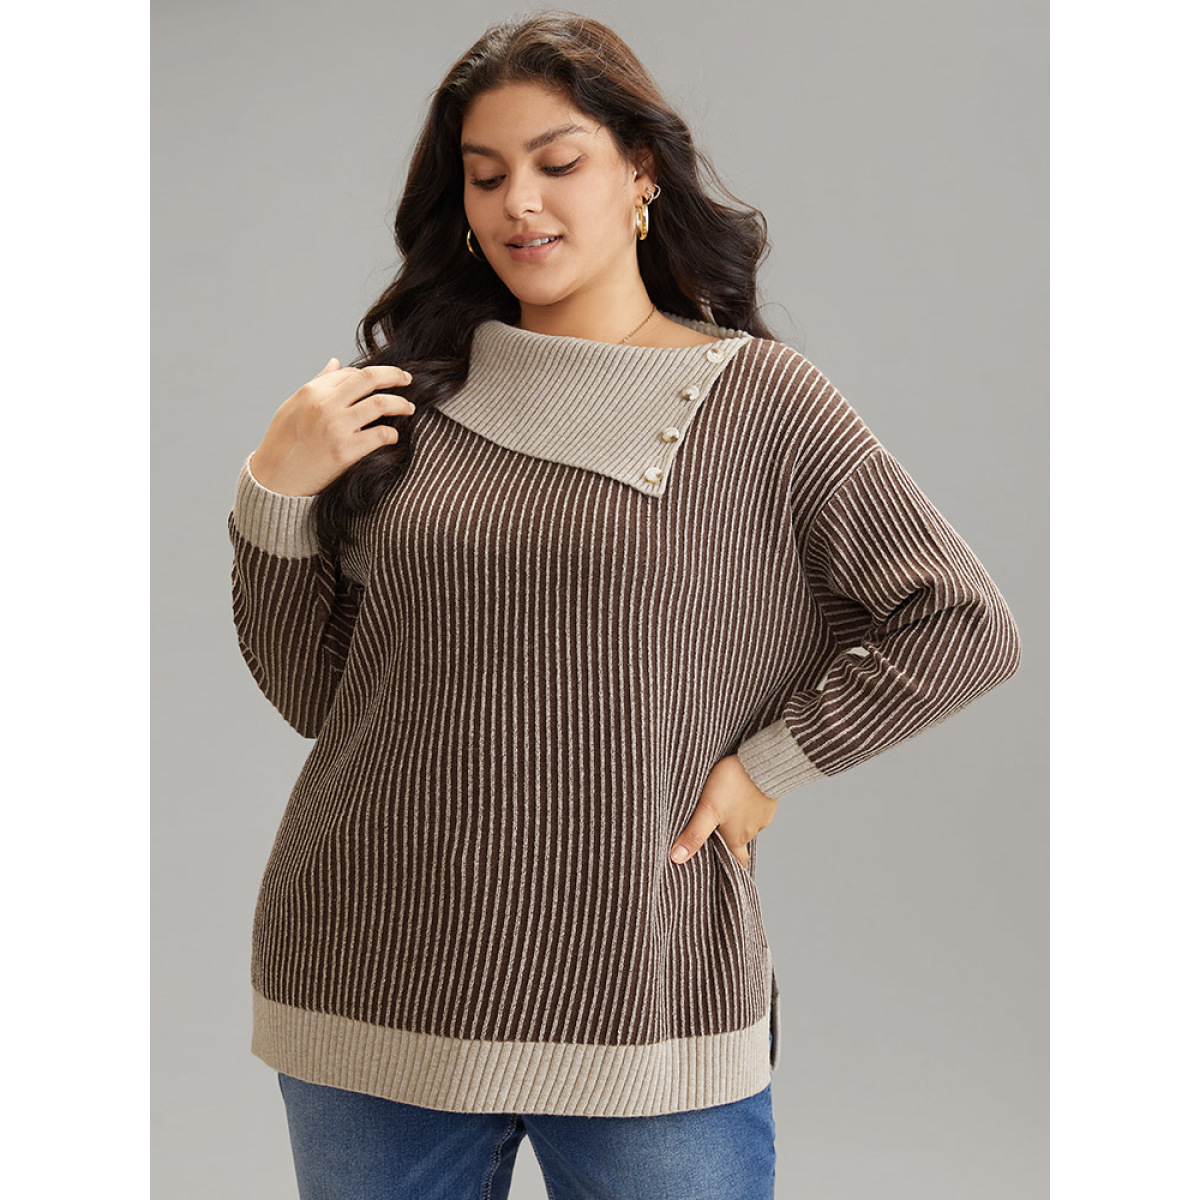 

Plus Size Supersoft Essentials Striped Button Detail Pullover DarkBrown Women Casual Loose Long Sleeve Asymmetrical Neck Dailywear Pullovers BloomChic